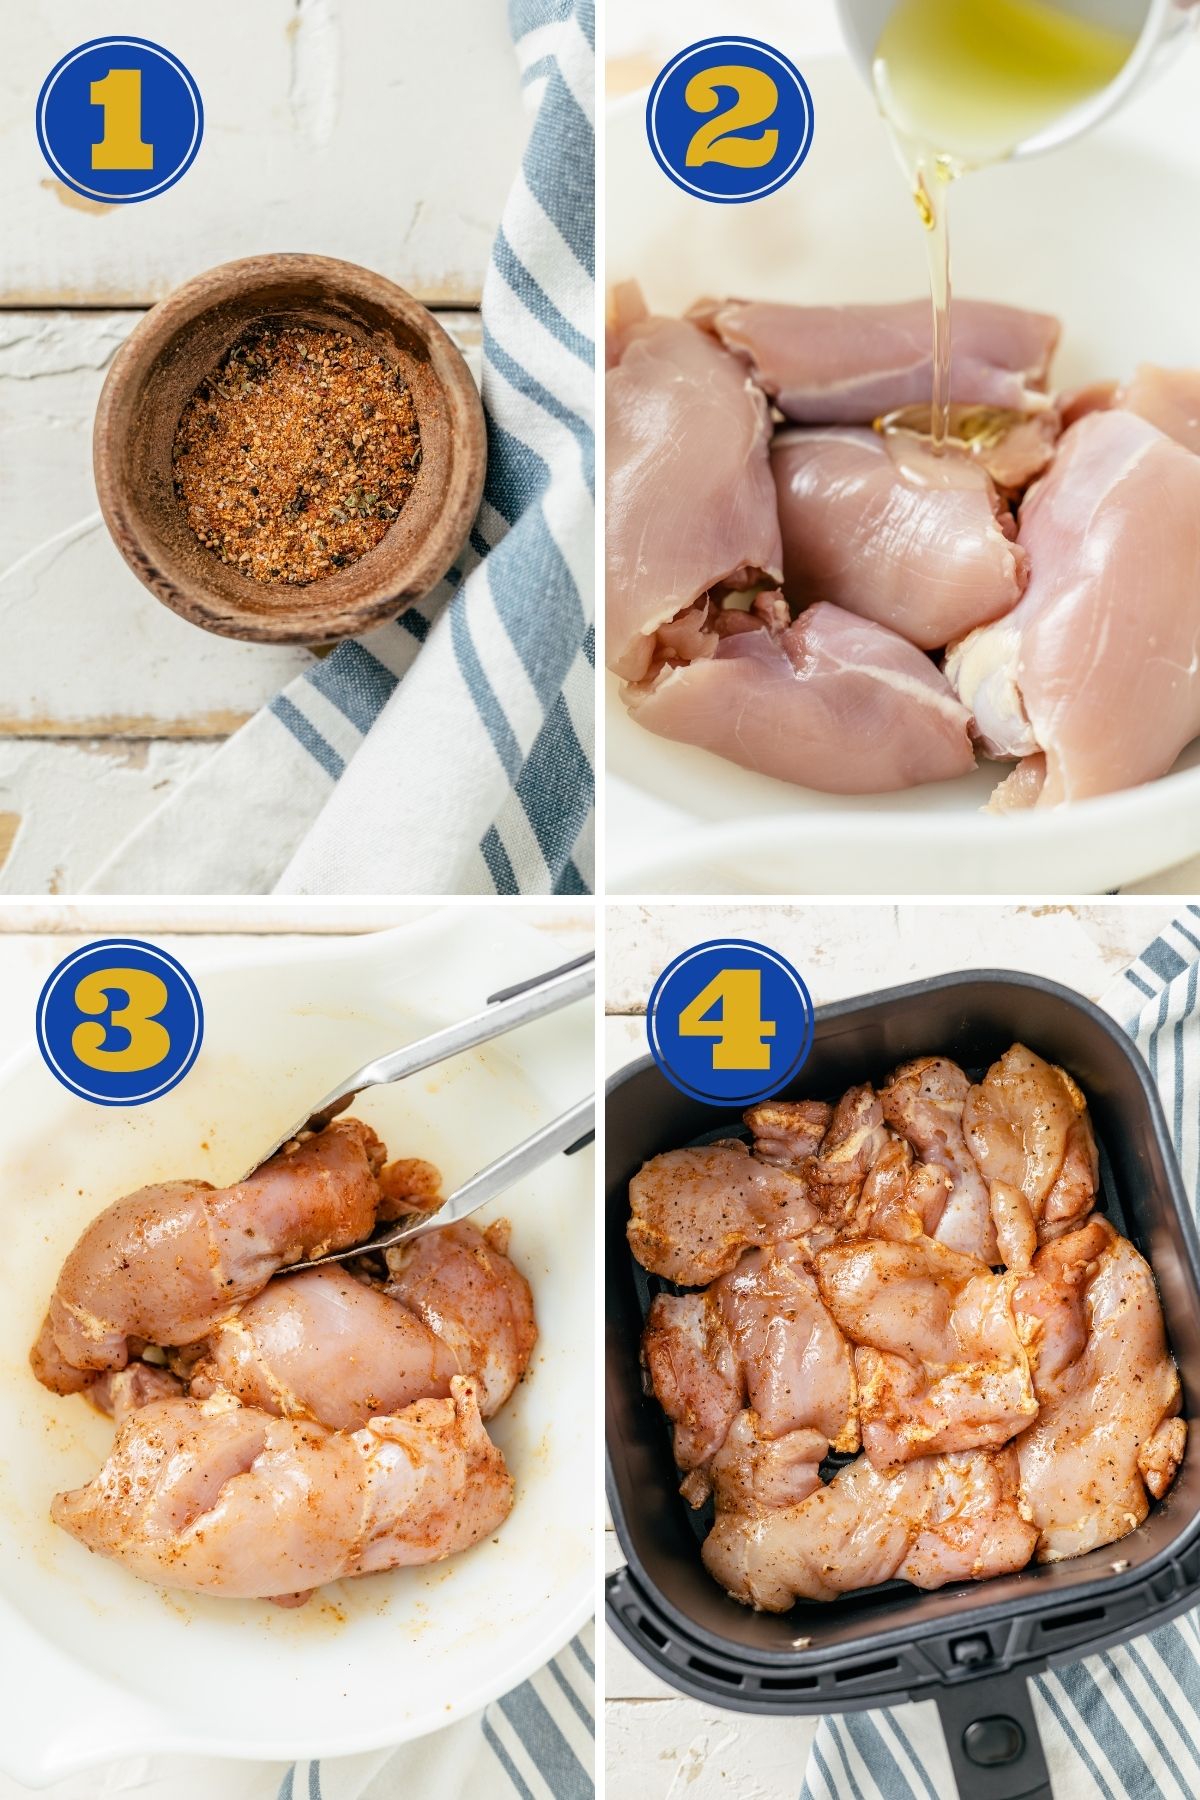 Sequential images displaying the step-by-step process of preparing and cooking boneless, skinless chicken thighs in an air fryer, showing the transformation from raw to golden-browned perfection.